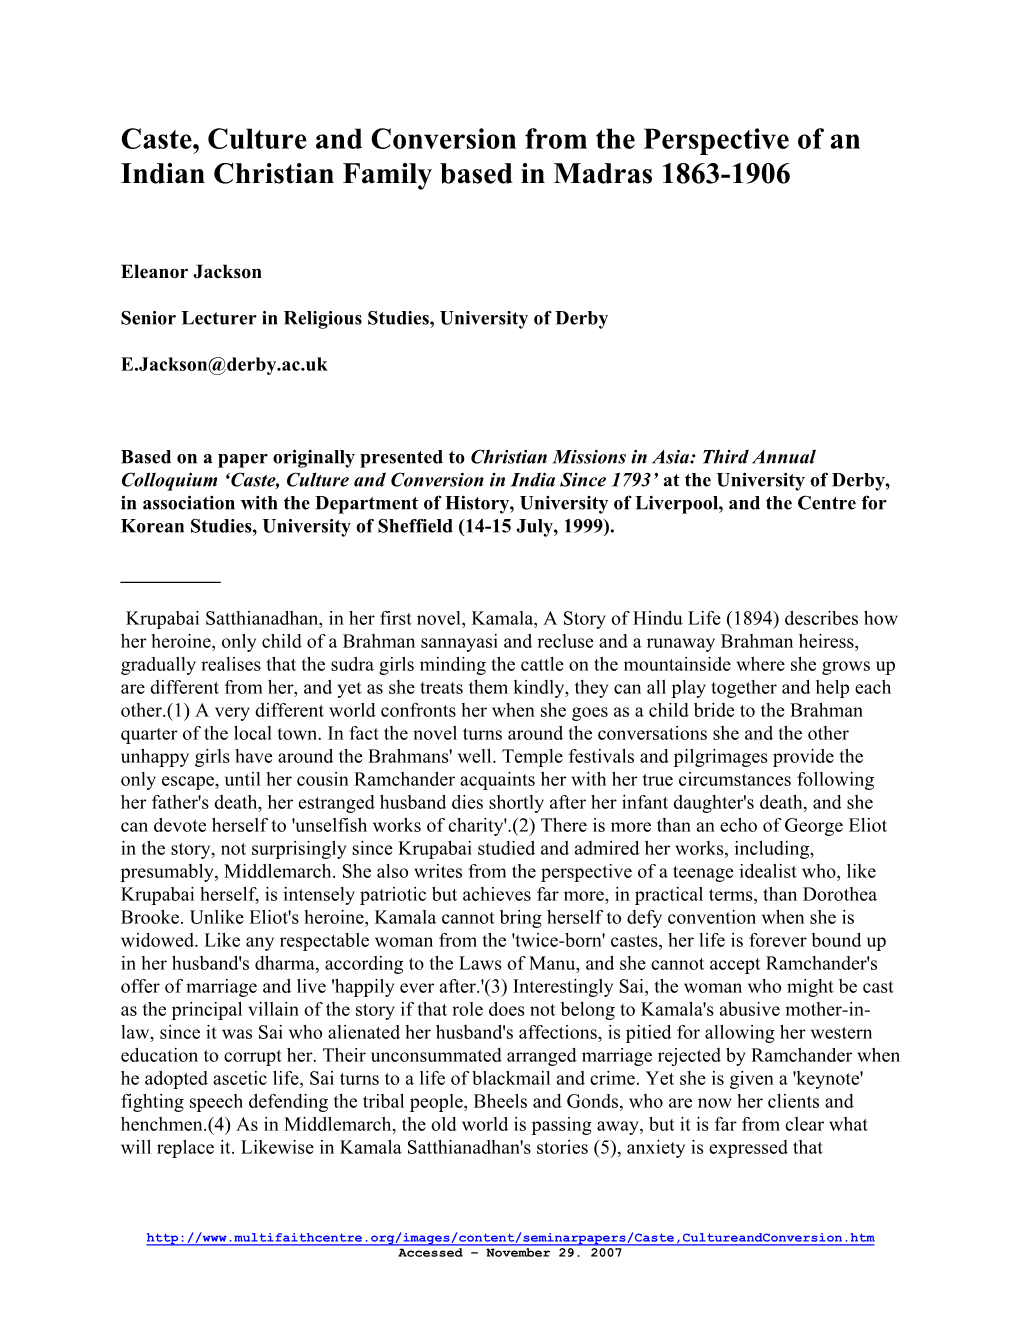 Caste, Culture and Conversion from the Perspective of an Indian Christian Family Based in Madras 1863-1906